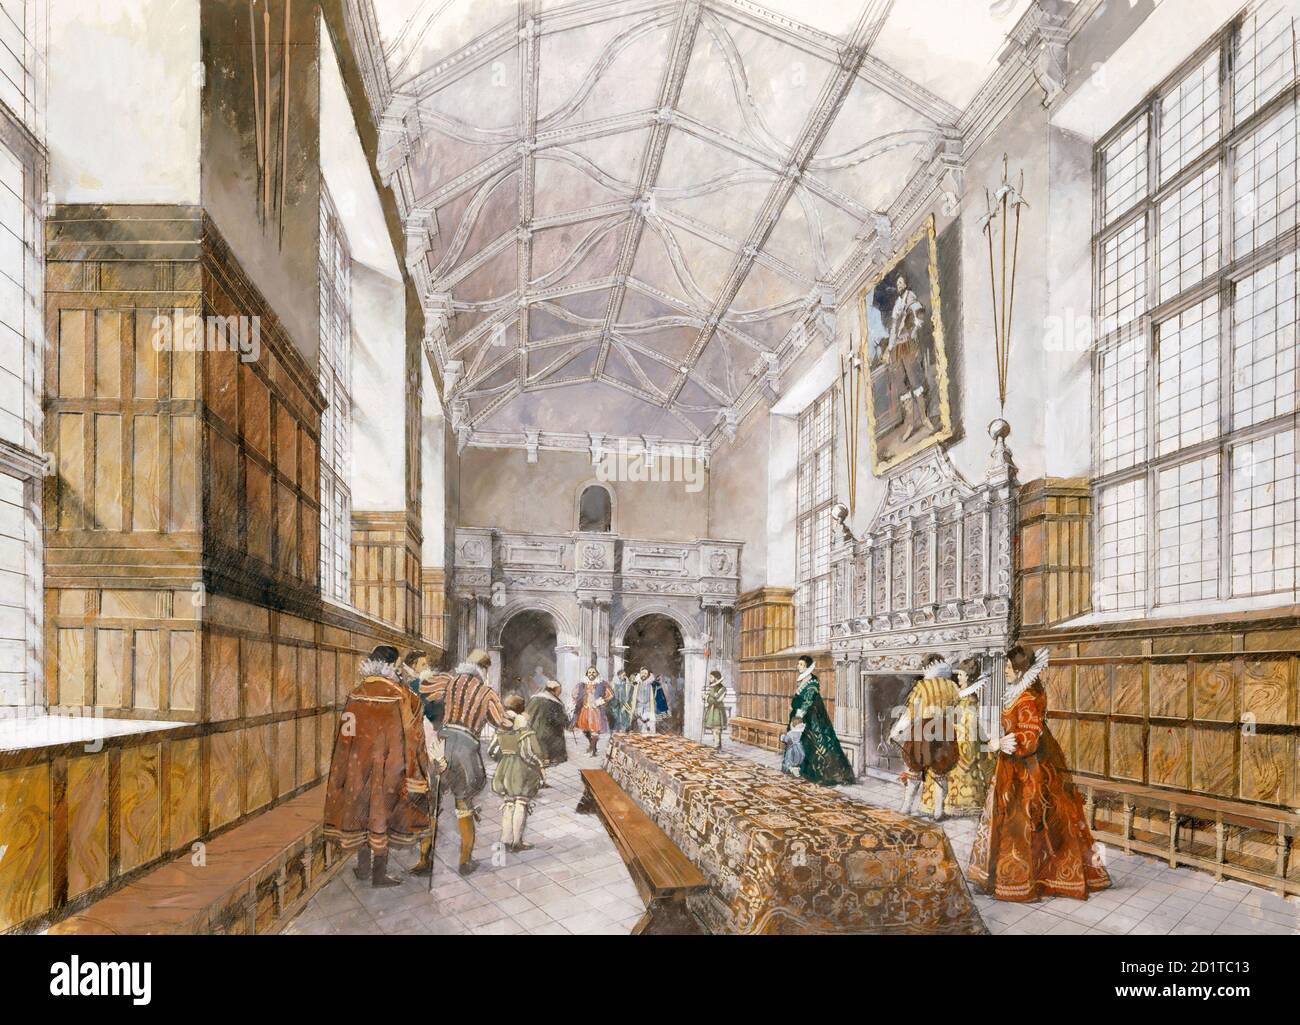 KIRBY HALL, Northamptonshire. Interior view of the hall as it might have appeared in the early 17th century. Reconstruction drawing by Ivan Lapper. Stock Photo